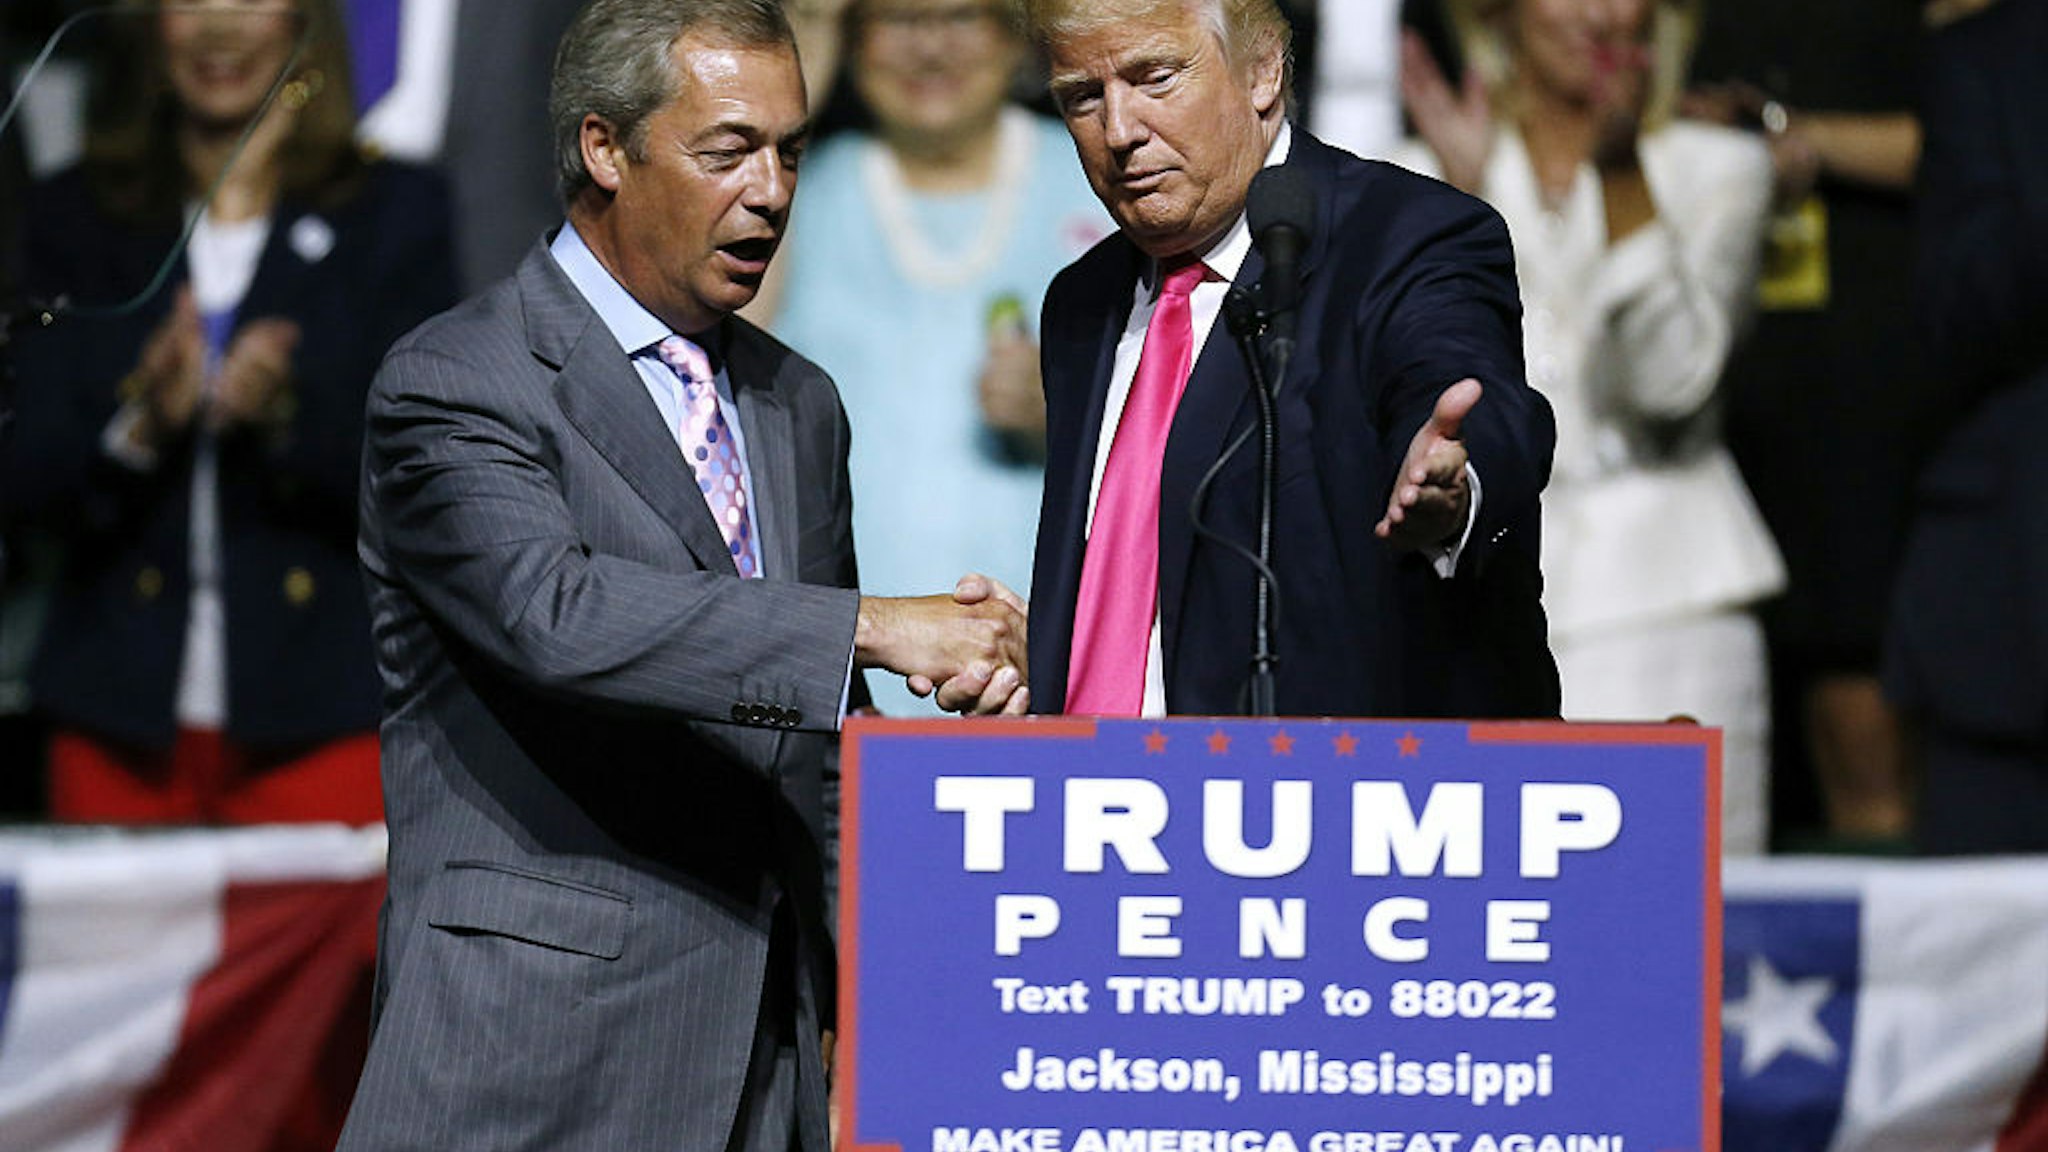 Republican Presidential nominee Donald Trump, right, invites United Kingdom Independence Party leader Nigel Farage to speak during a campaign rally at the Mississippi Coliseum on August 24, 2016 in Jackson, Mississippi.